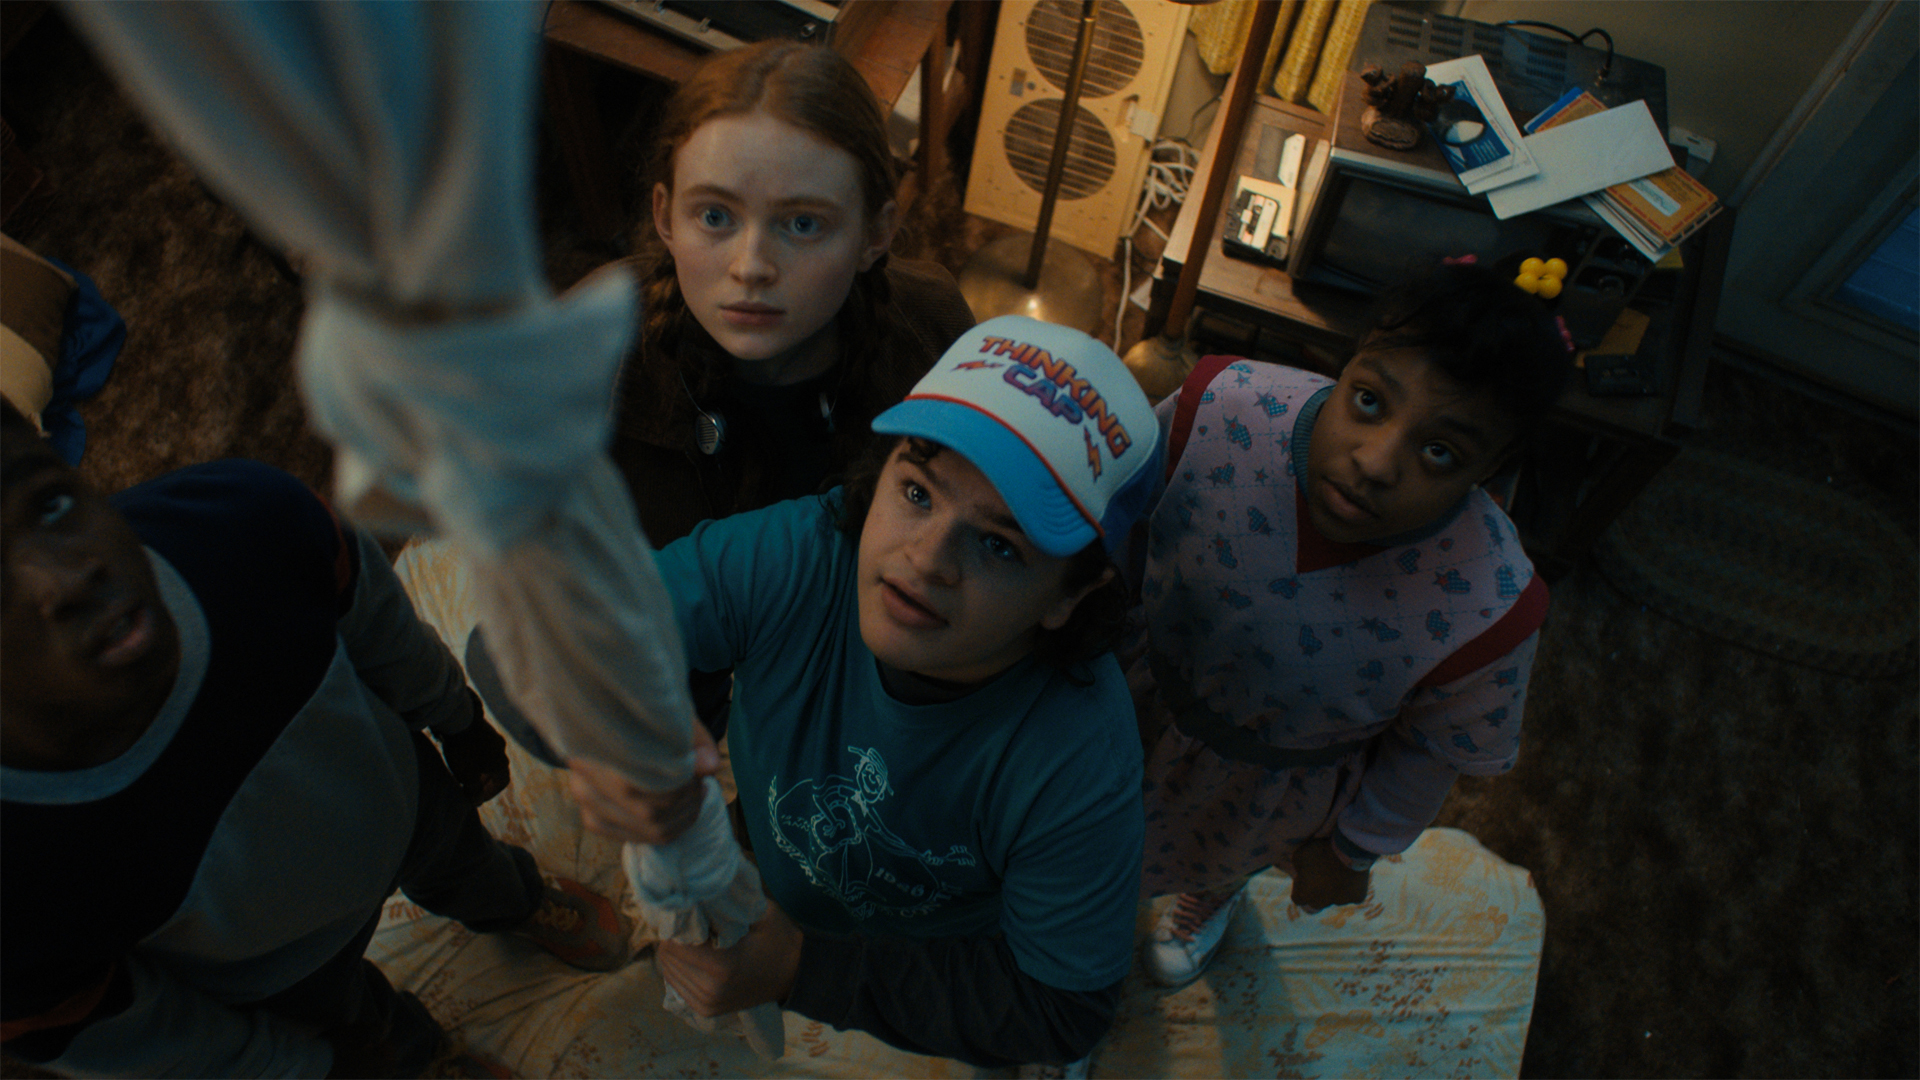 Dustin, Max and Erica in Stranger Things season 4